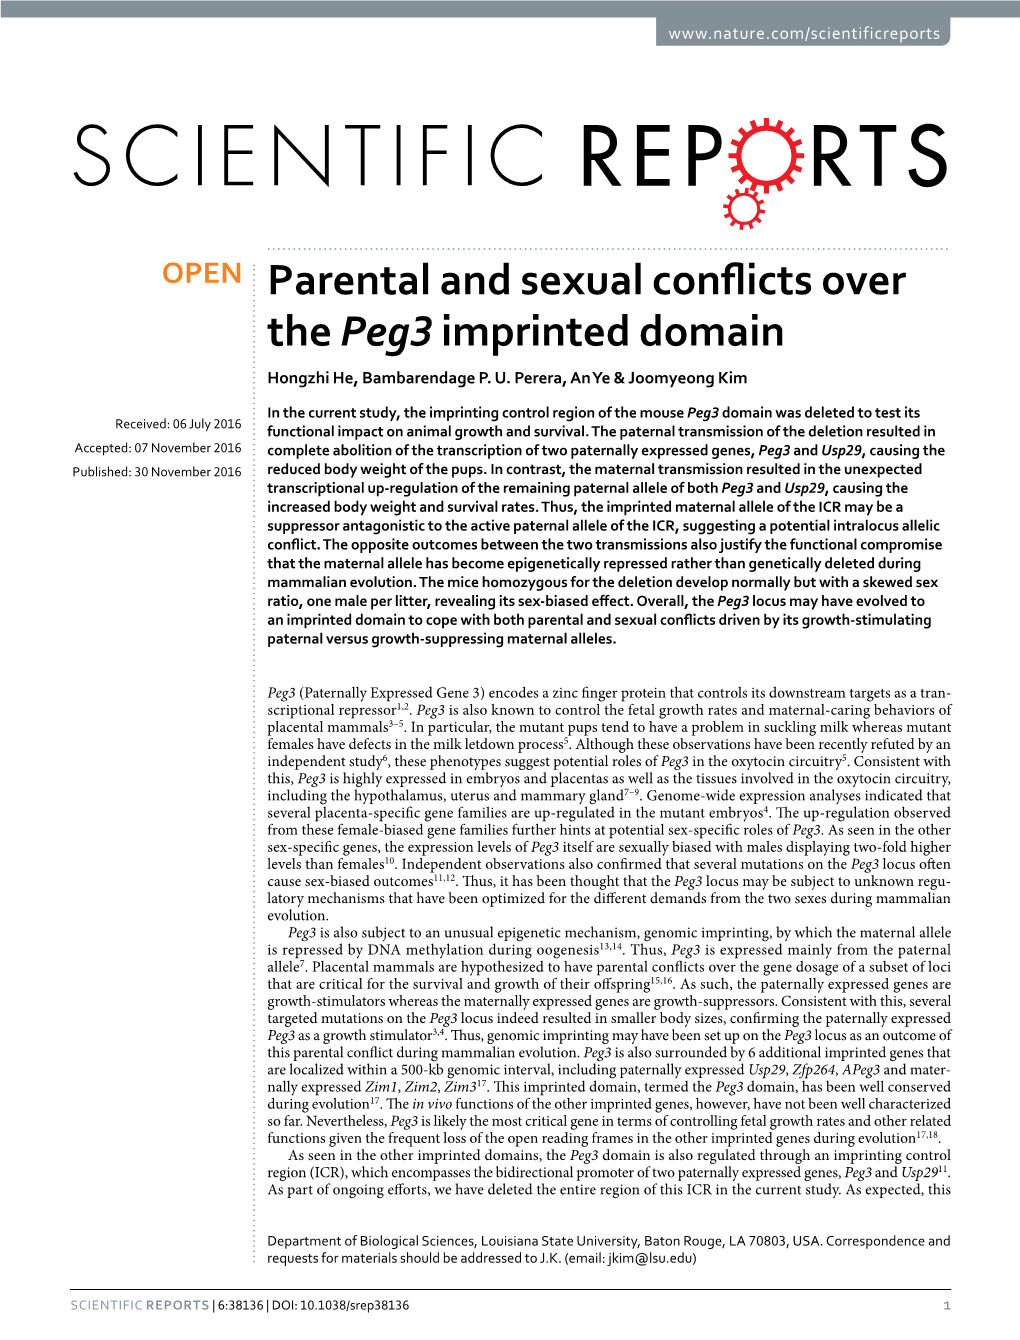 Parental and Sexual Conflicts Over the Peg3 Imprinted Domain Hongzhi He, Bambarendage P